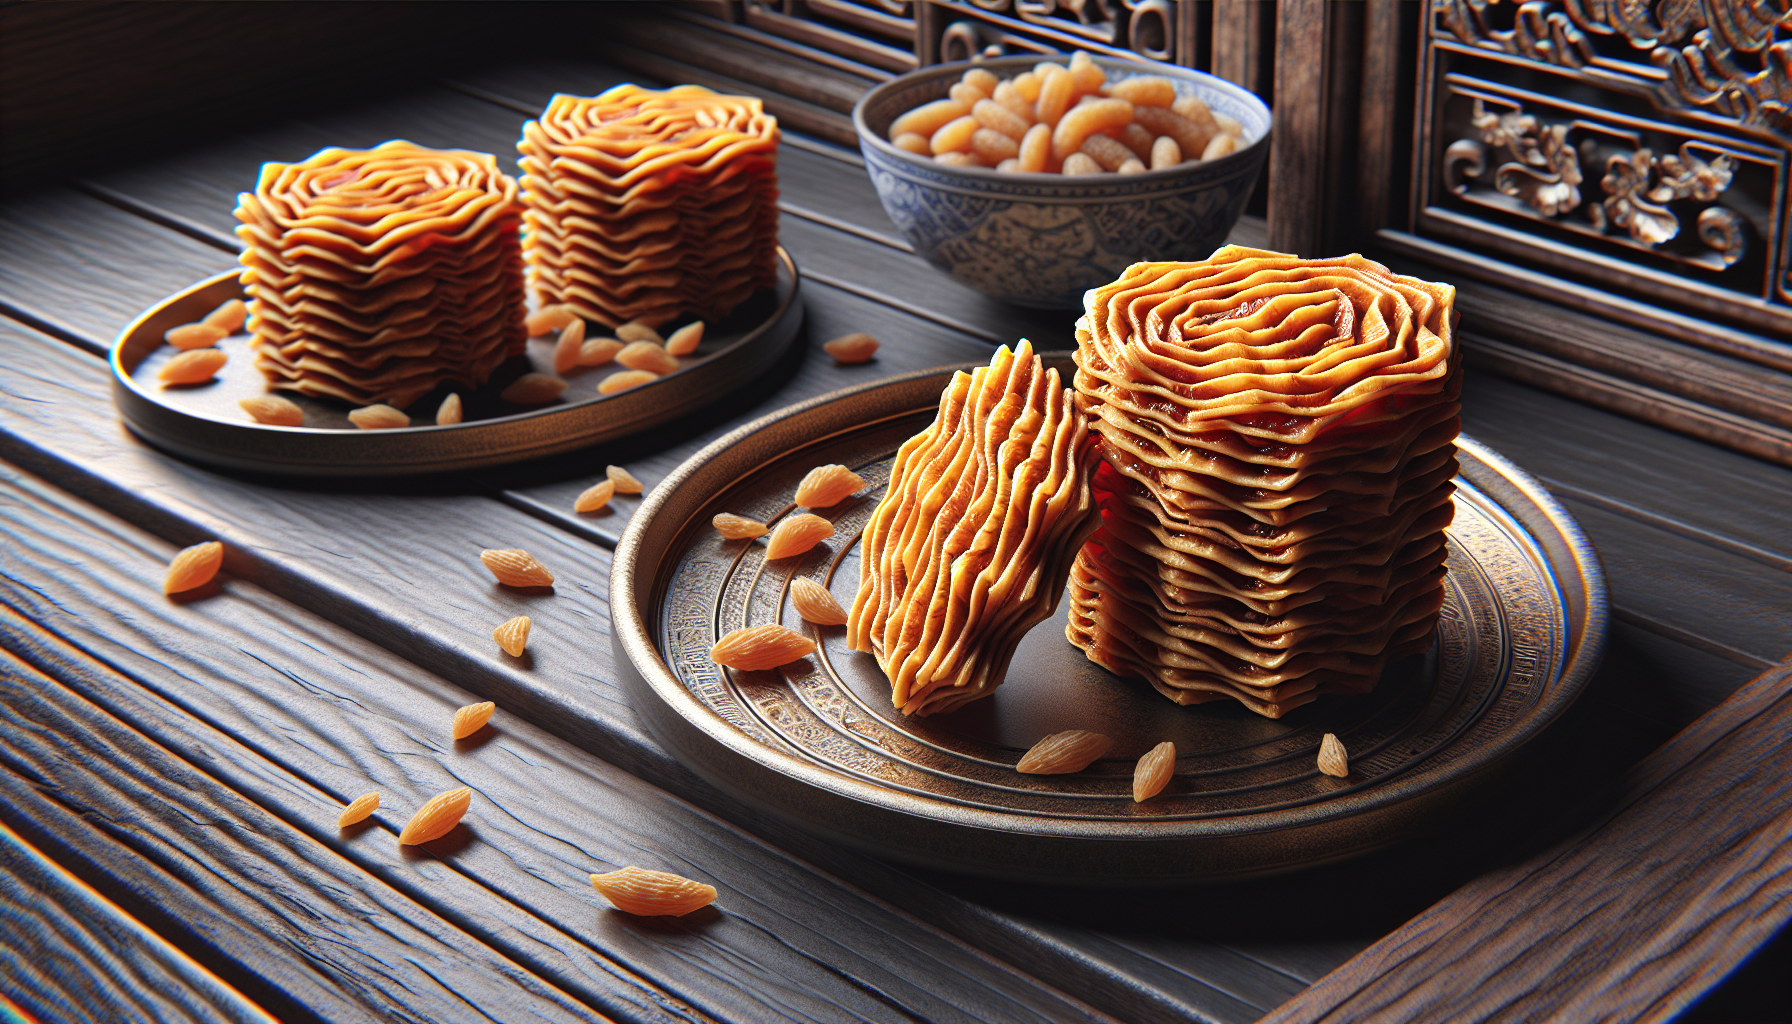 Whats Your Favorite Way To Enjoy Sachima, The Chinese Sweet And Crispy Snack?